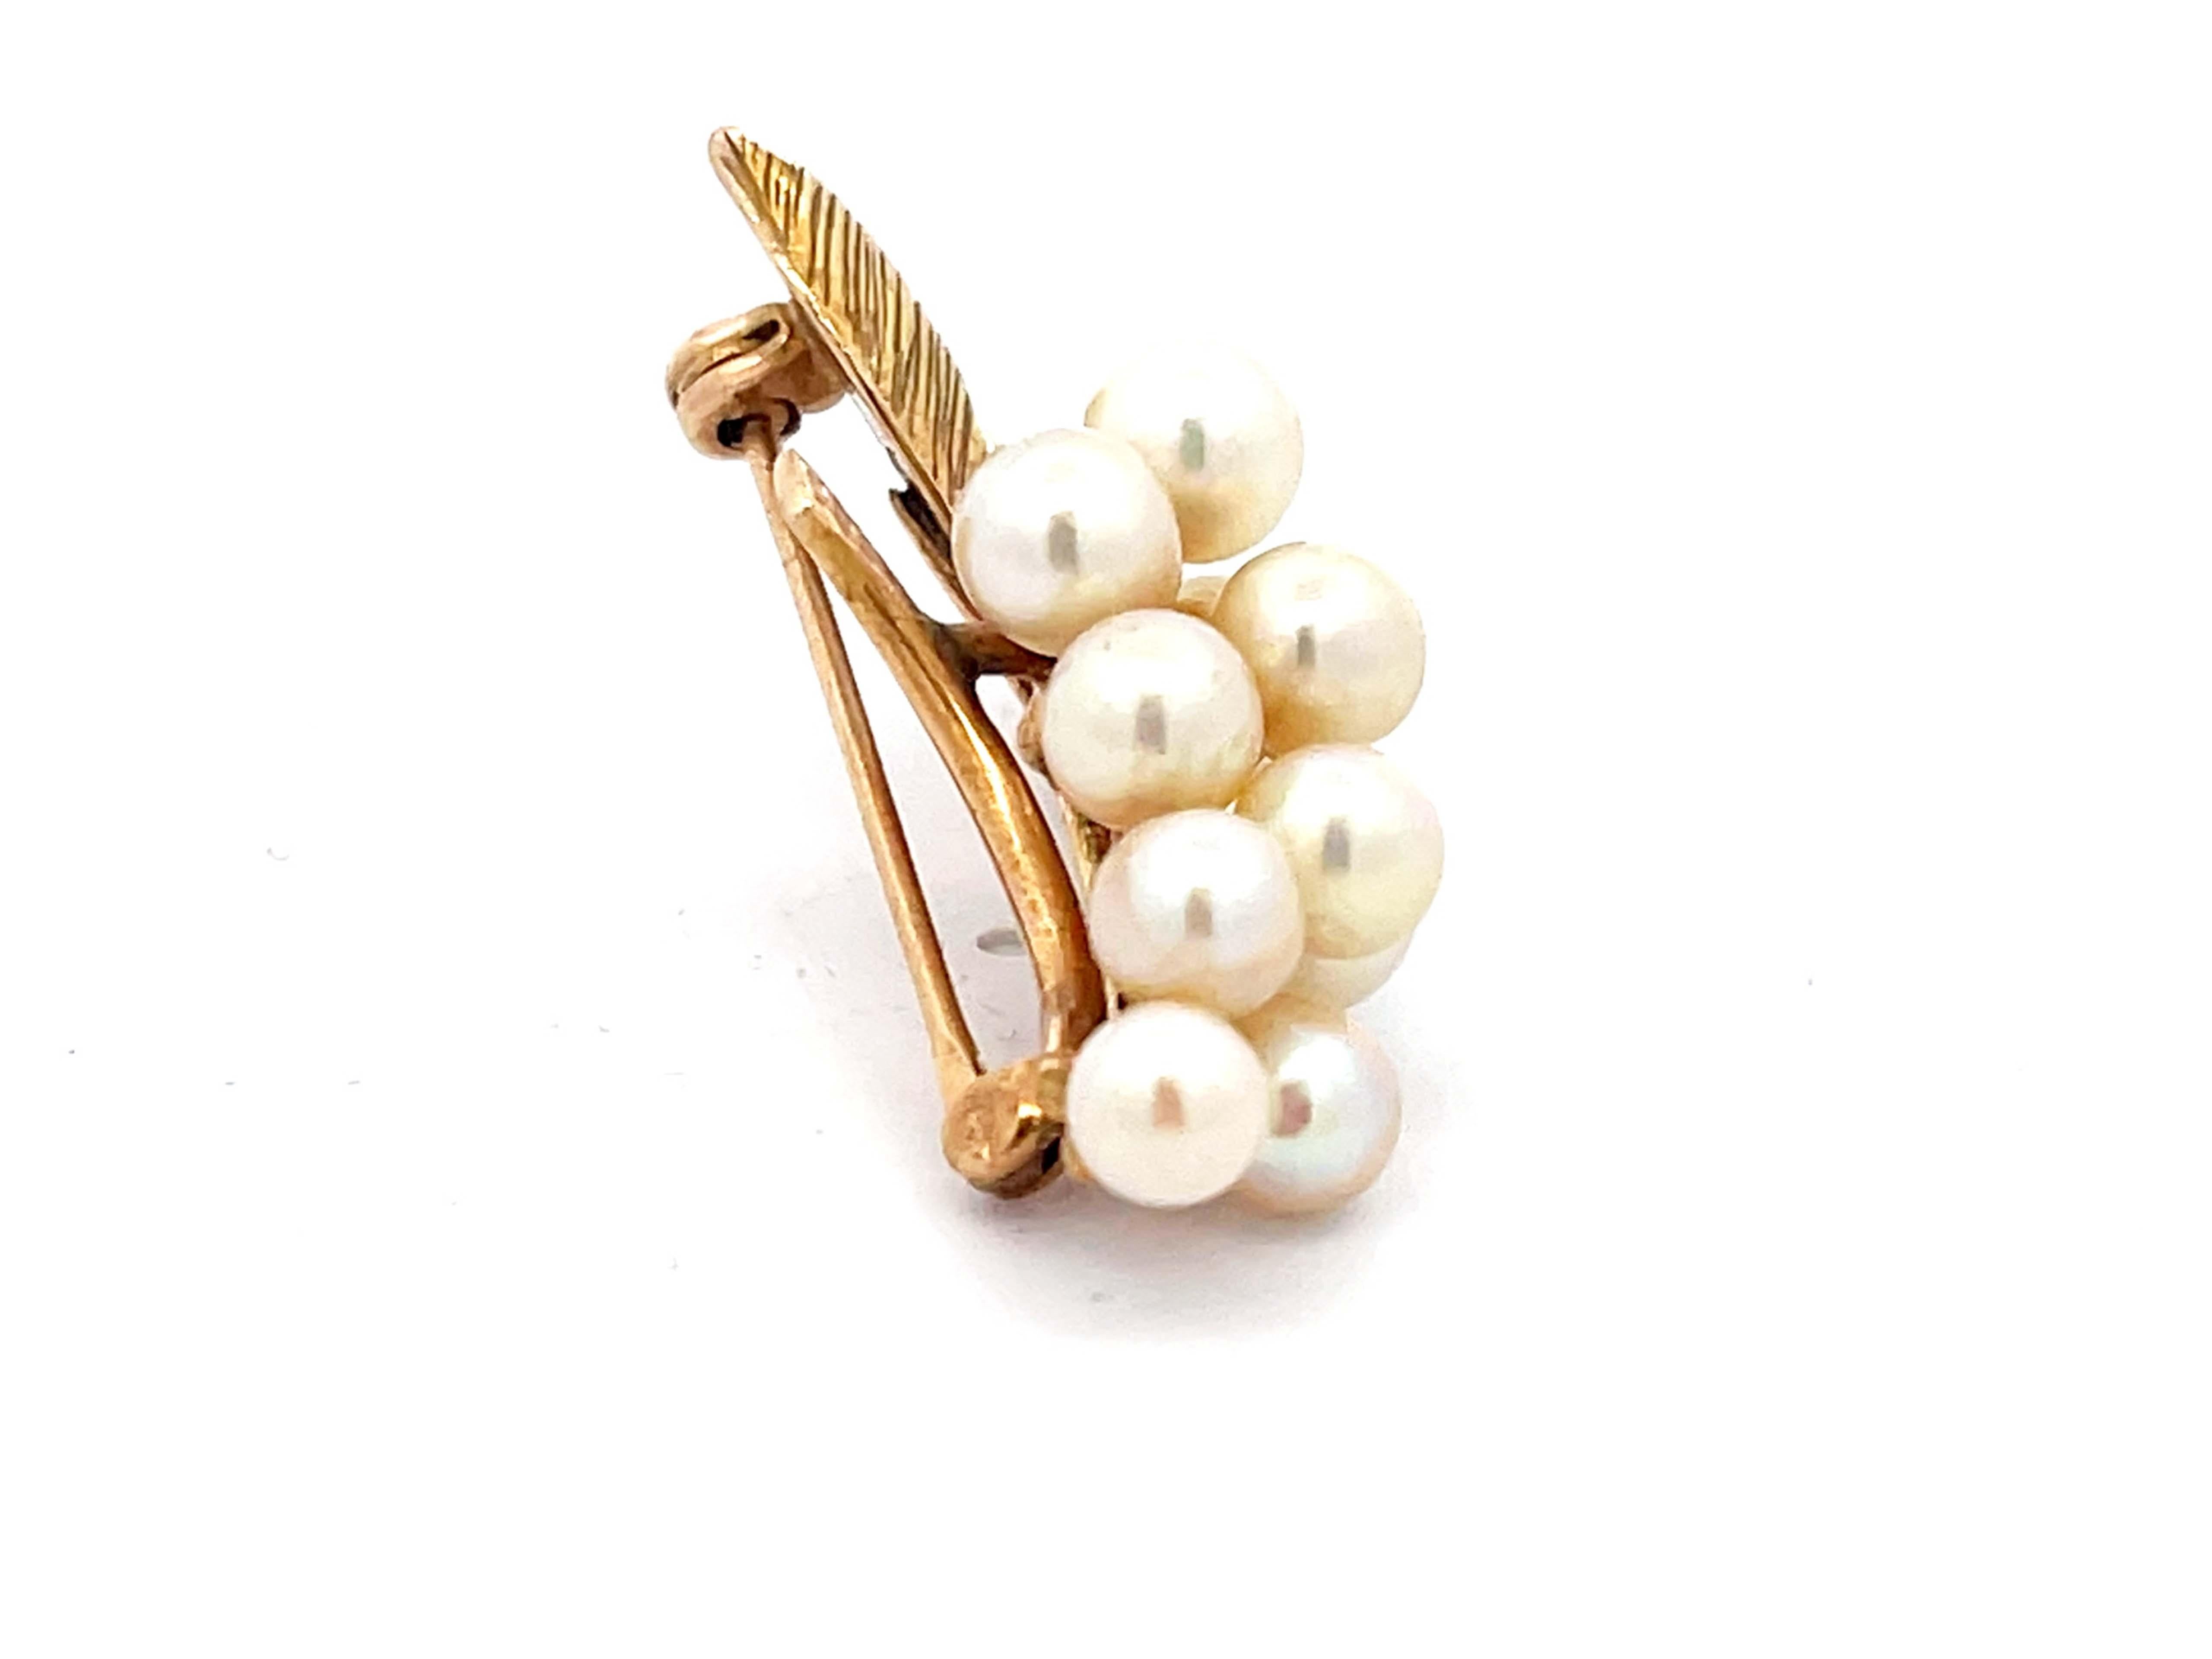 Mings Hawaii Pearl Branch Brooch in 14k Yellow Gold In Excellent Condition For Sale In Honolulu, HI